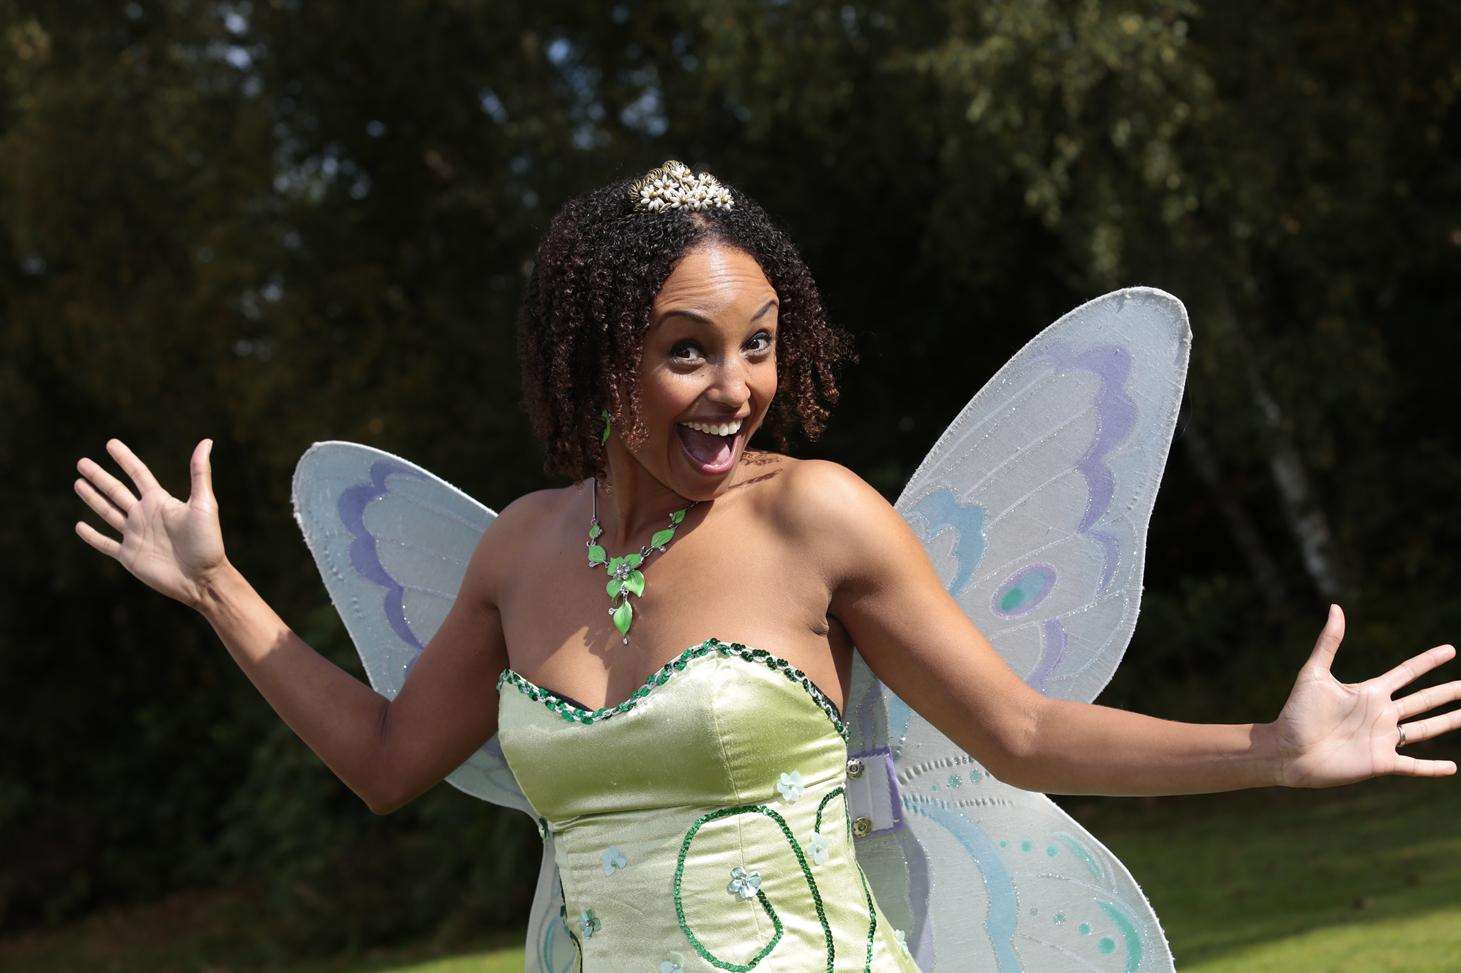 Cbeebies star Gemma Hunt will play Tinkerbell in the production